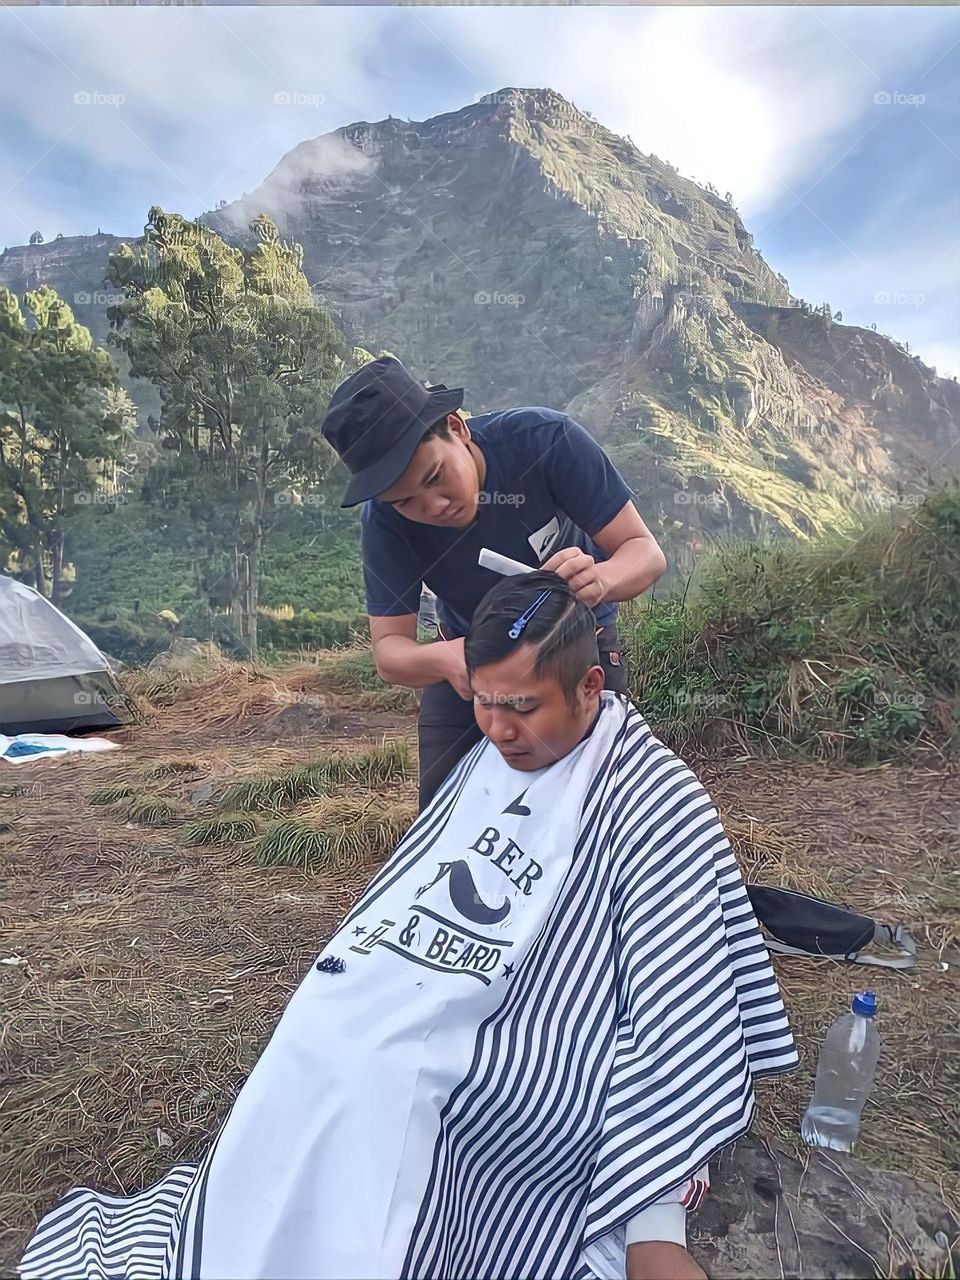 Giving Client the Best Haircut on the Top of Mountain Barbershop